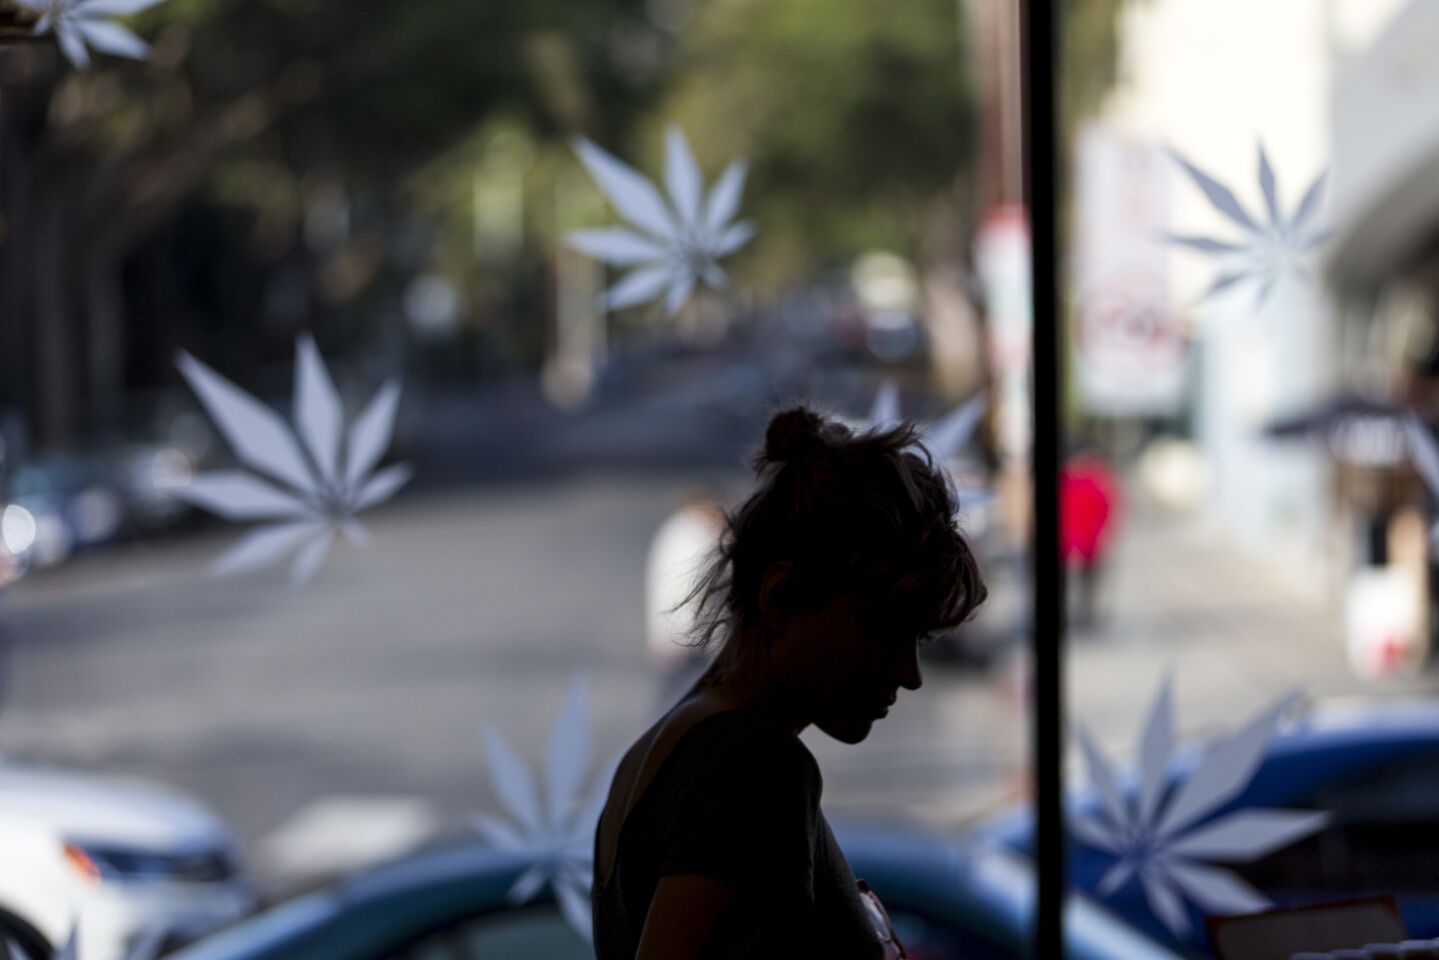 A shopper at MedMen, a marijuana dispensary in West Hollywood, on New Year's Eve.